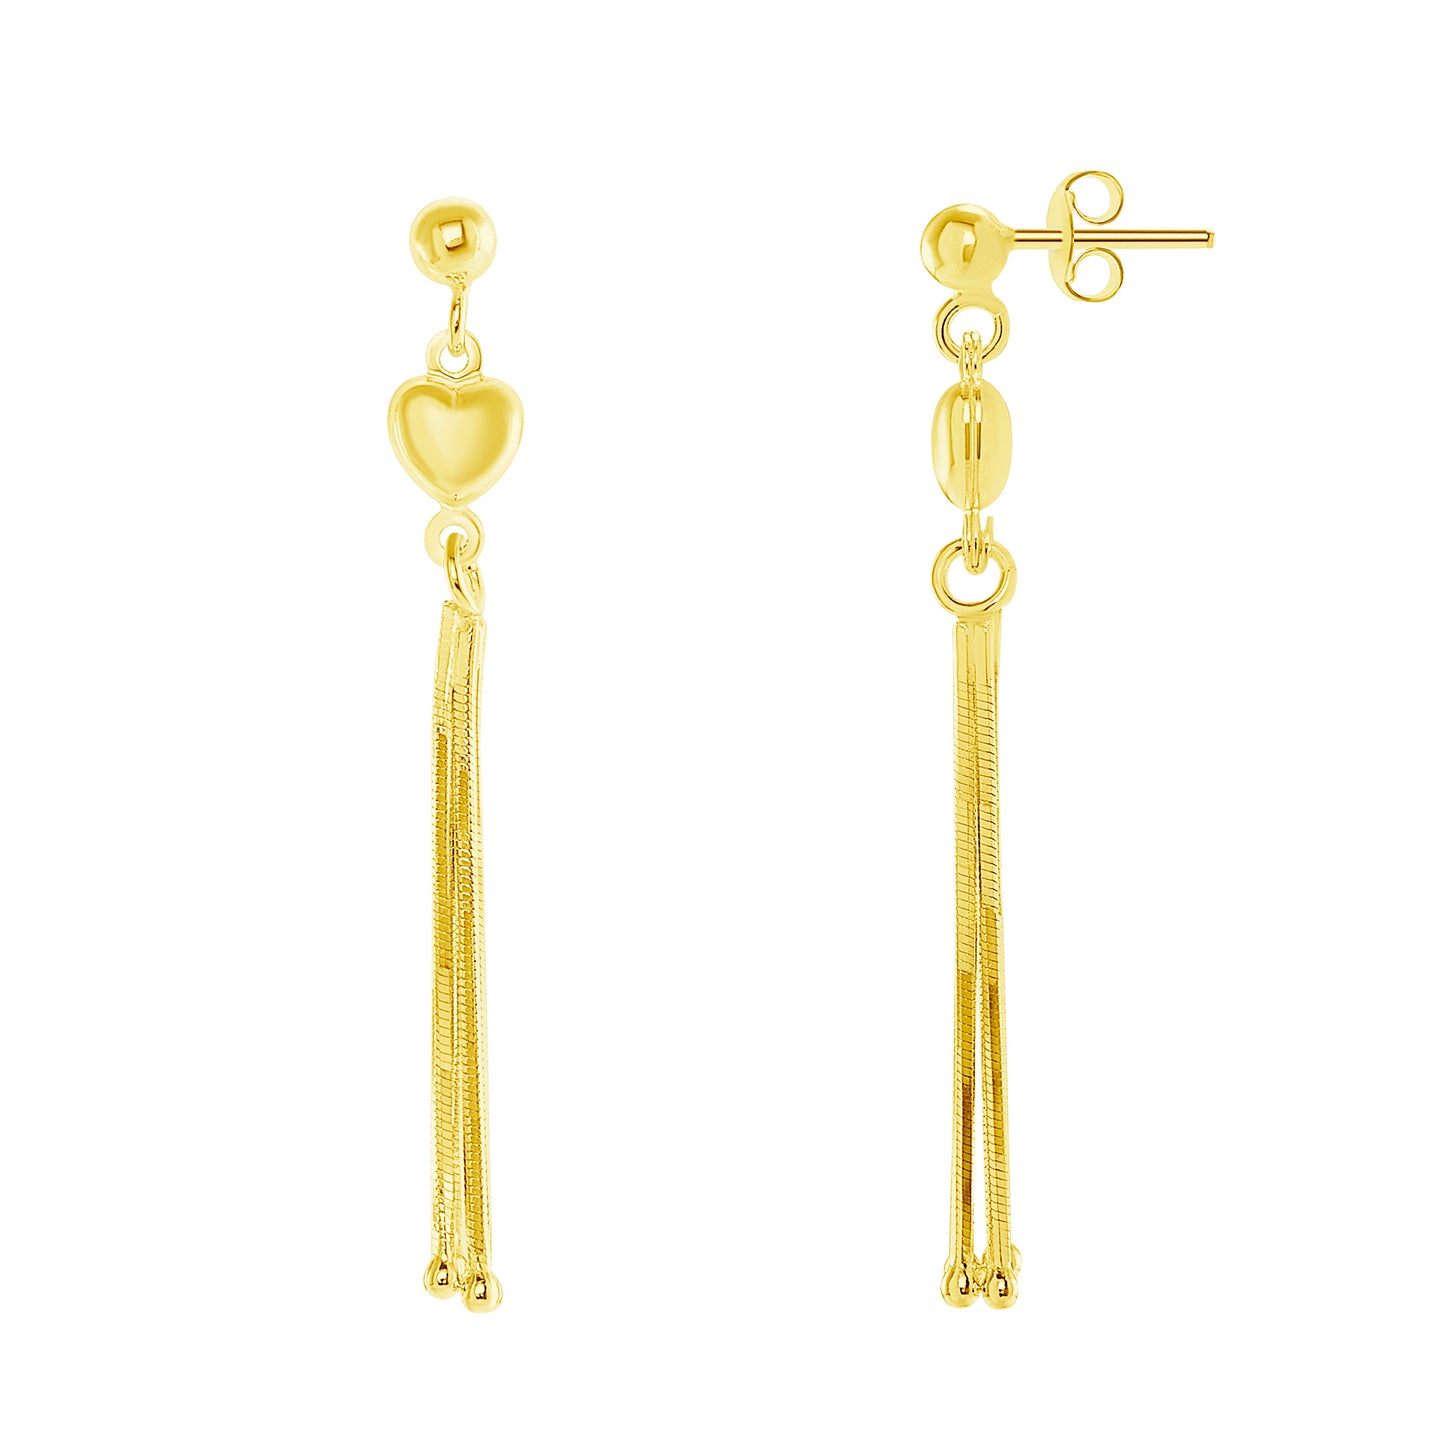 Silver 925 Yellow Gold Plated Long Earring 3 Lines. ITE205-YG